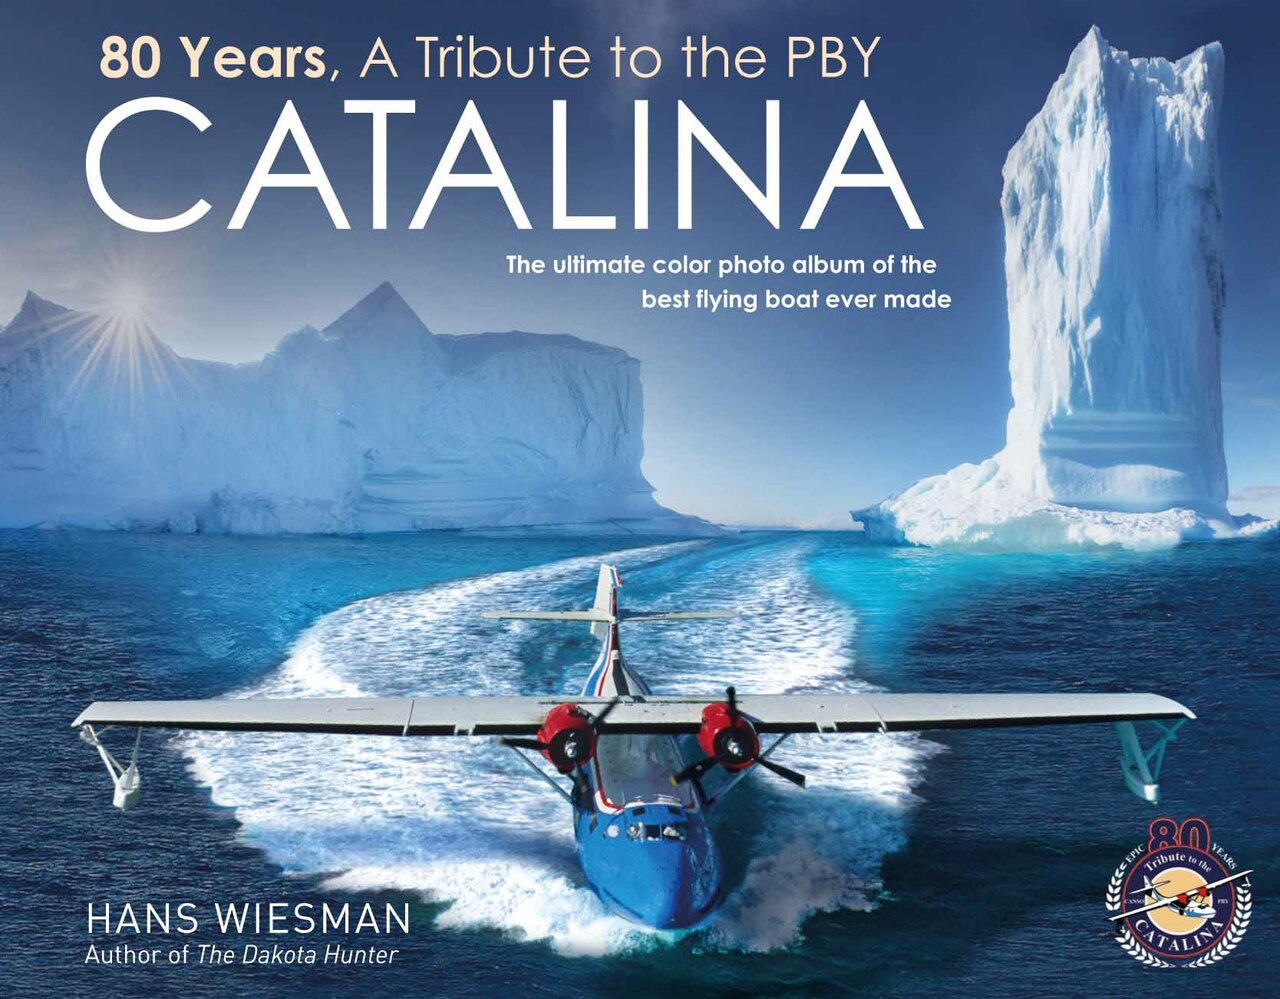 80 Years, a tribute to the PBY Catalina:The ultimate color photo album of the best flying boat ever made